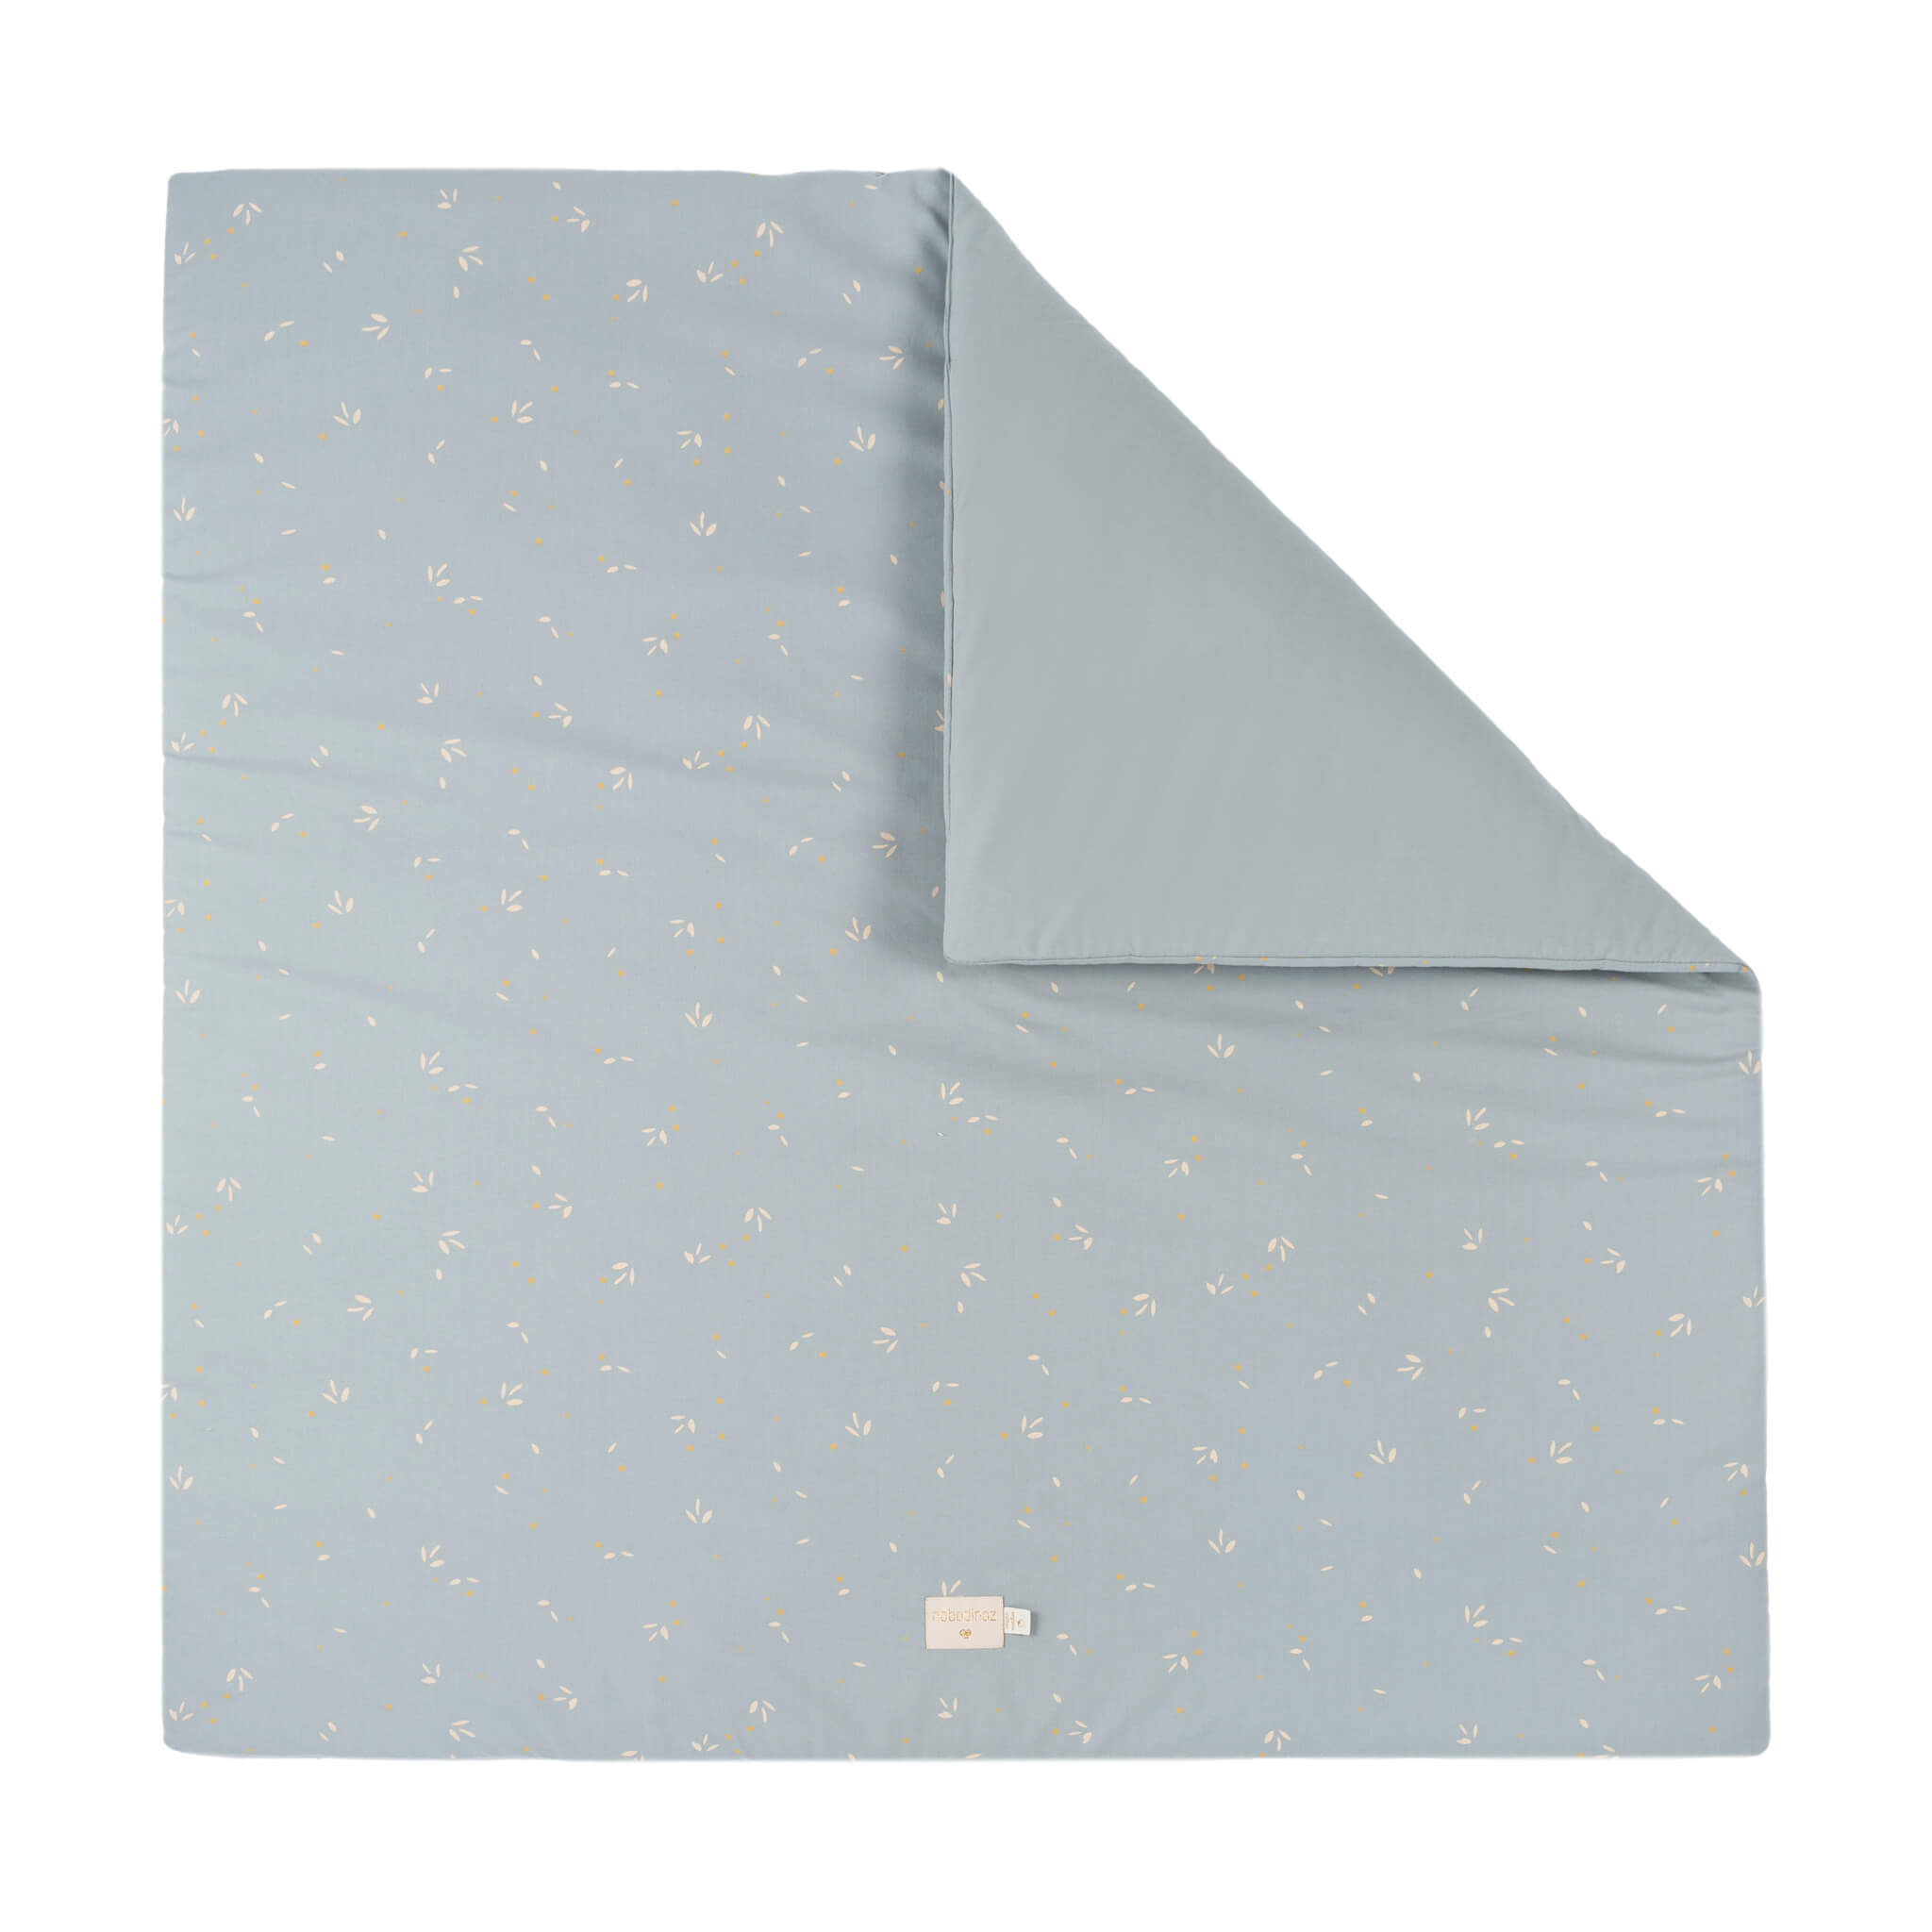 Nobodinoz Colorado Square Playmat in Willow Soft Blue